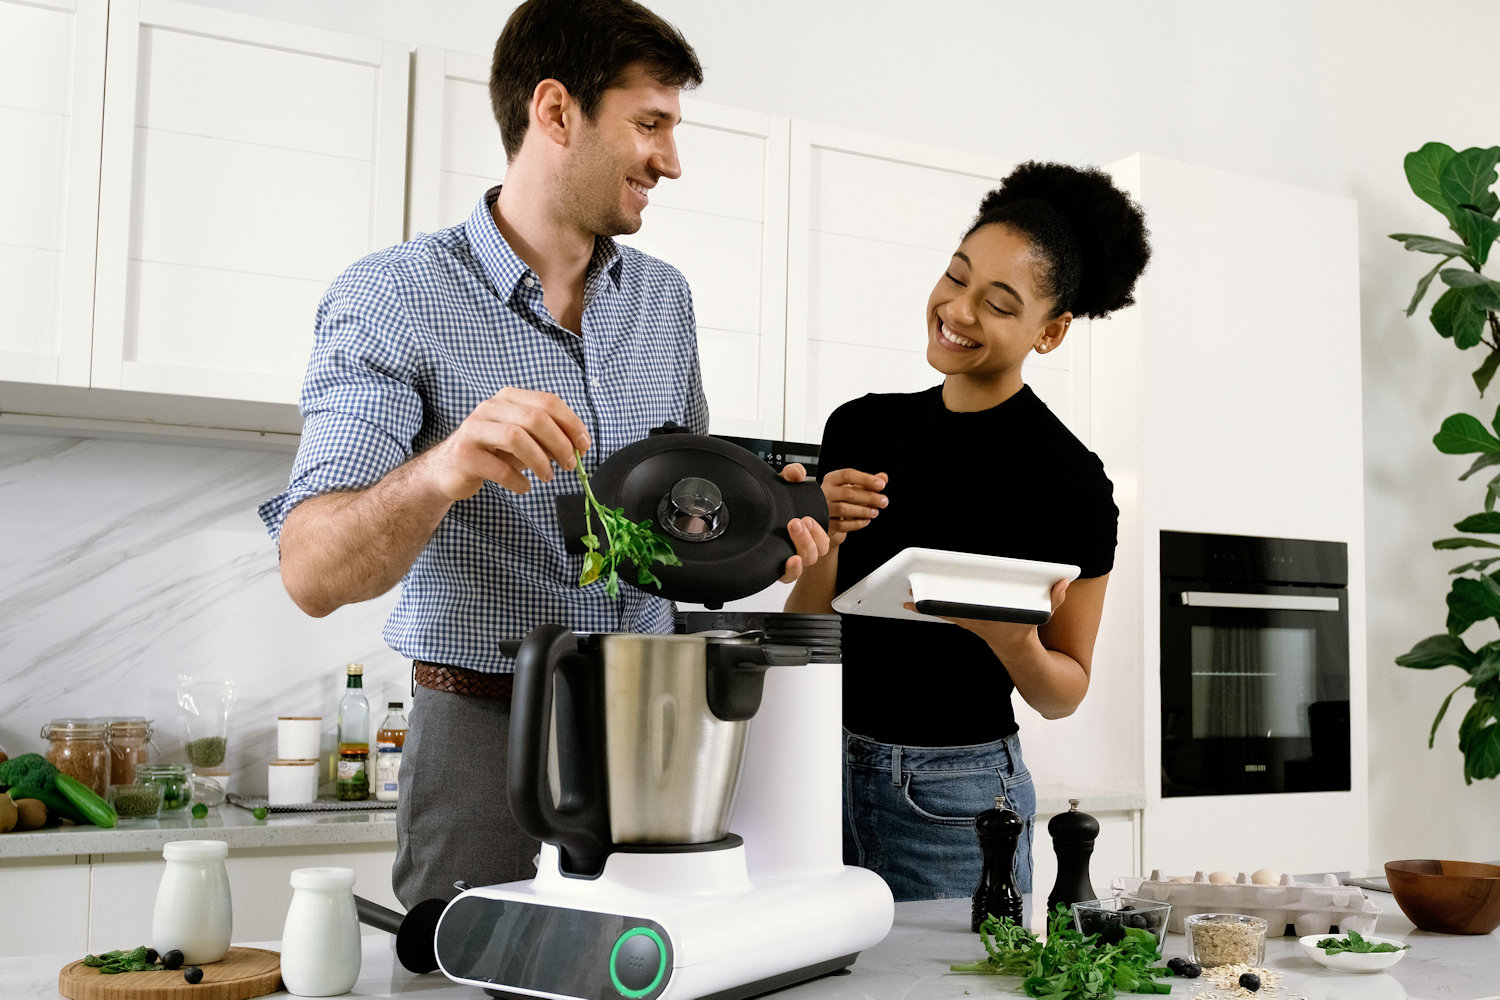 Robot Cooks Are Just Food With Extra Steps | Digital Trends